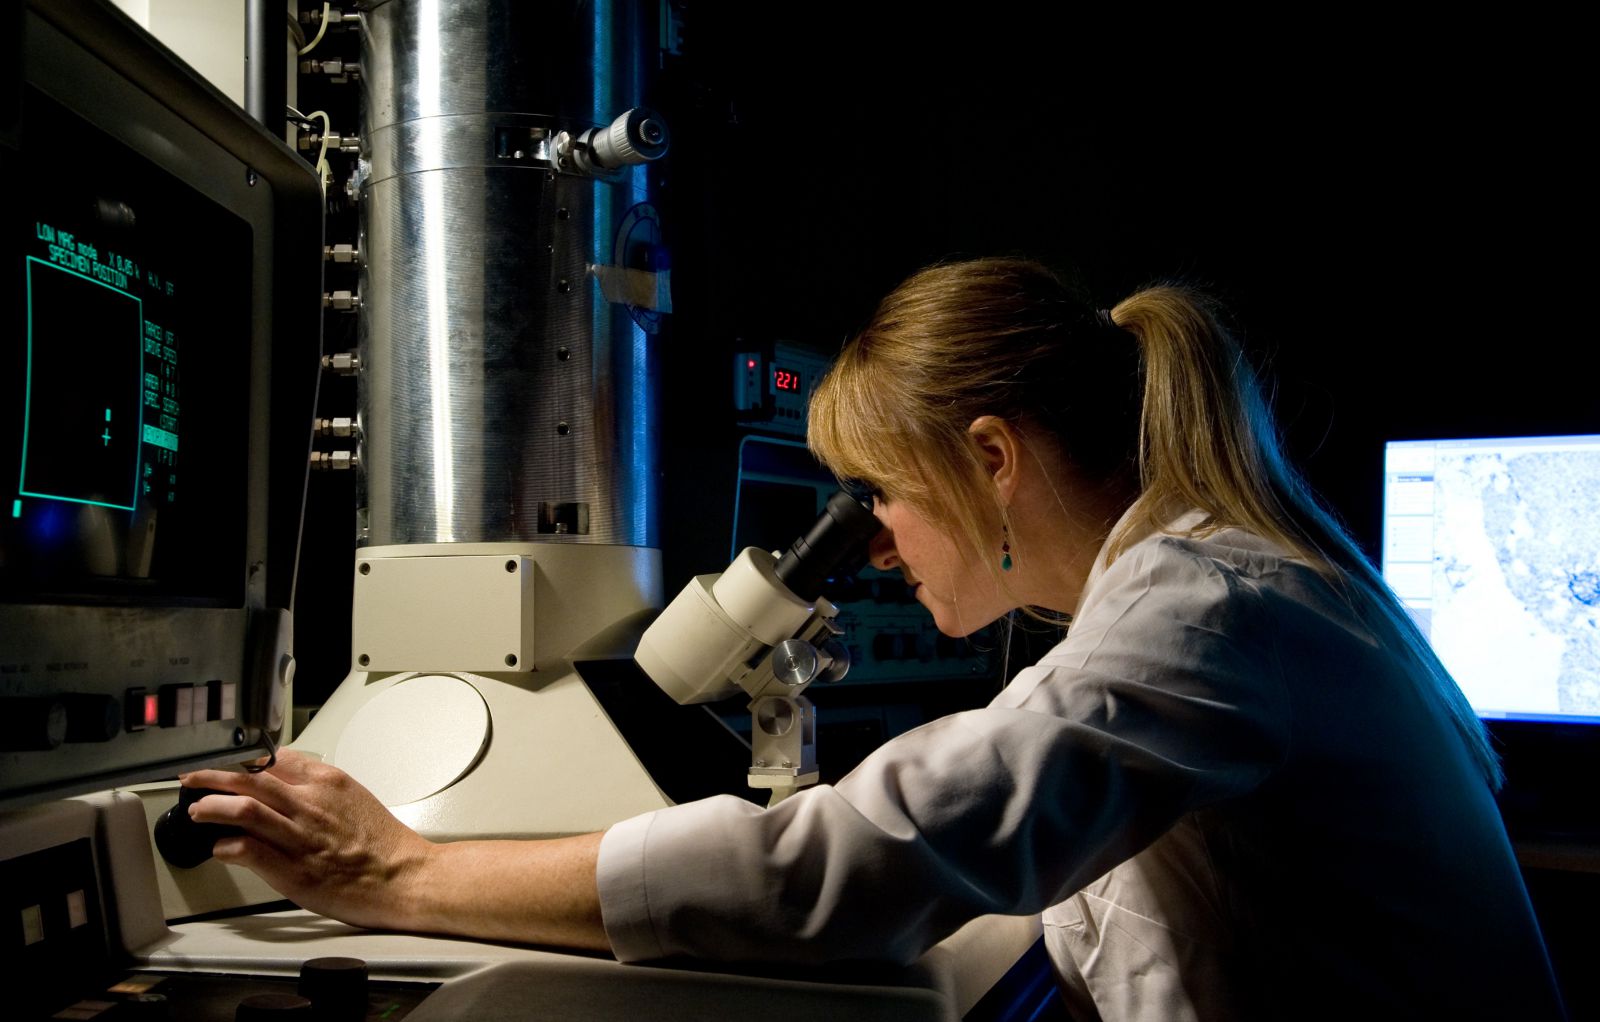 PhD student looks through a microscope in a science lab at the СƵ